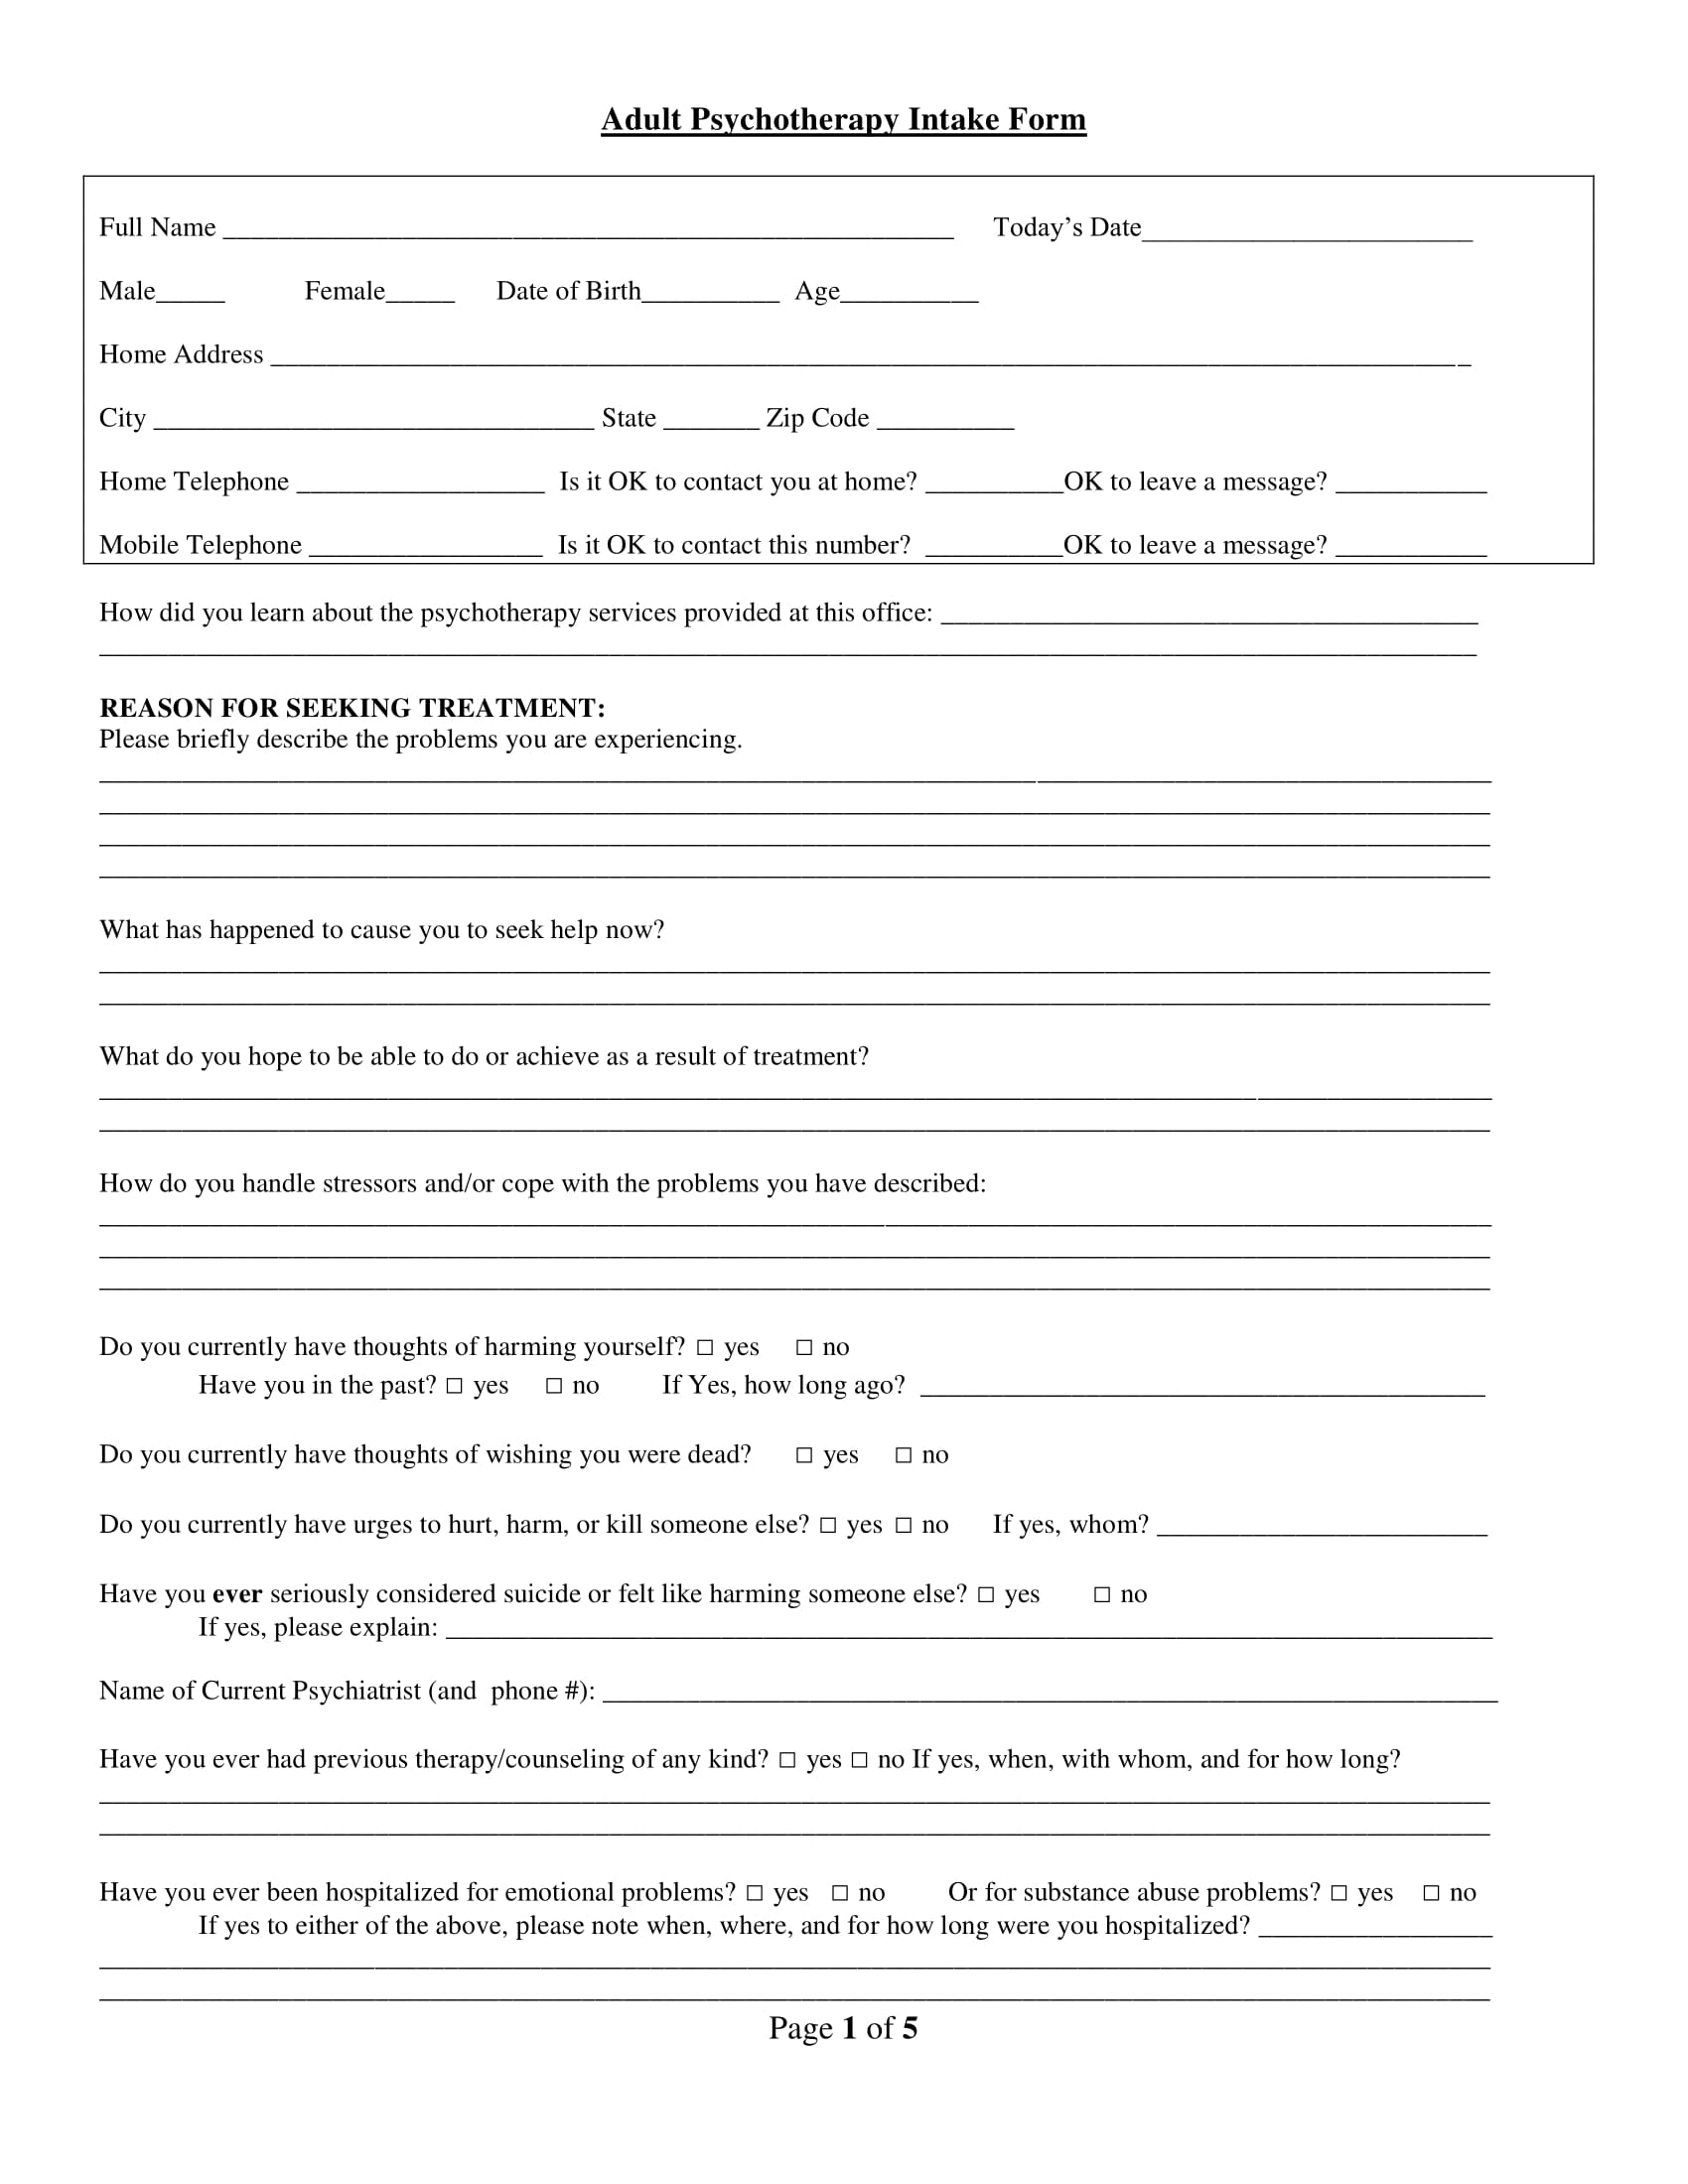 adult psychotherapy intake form 1